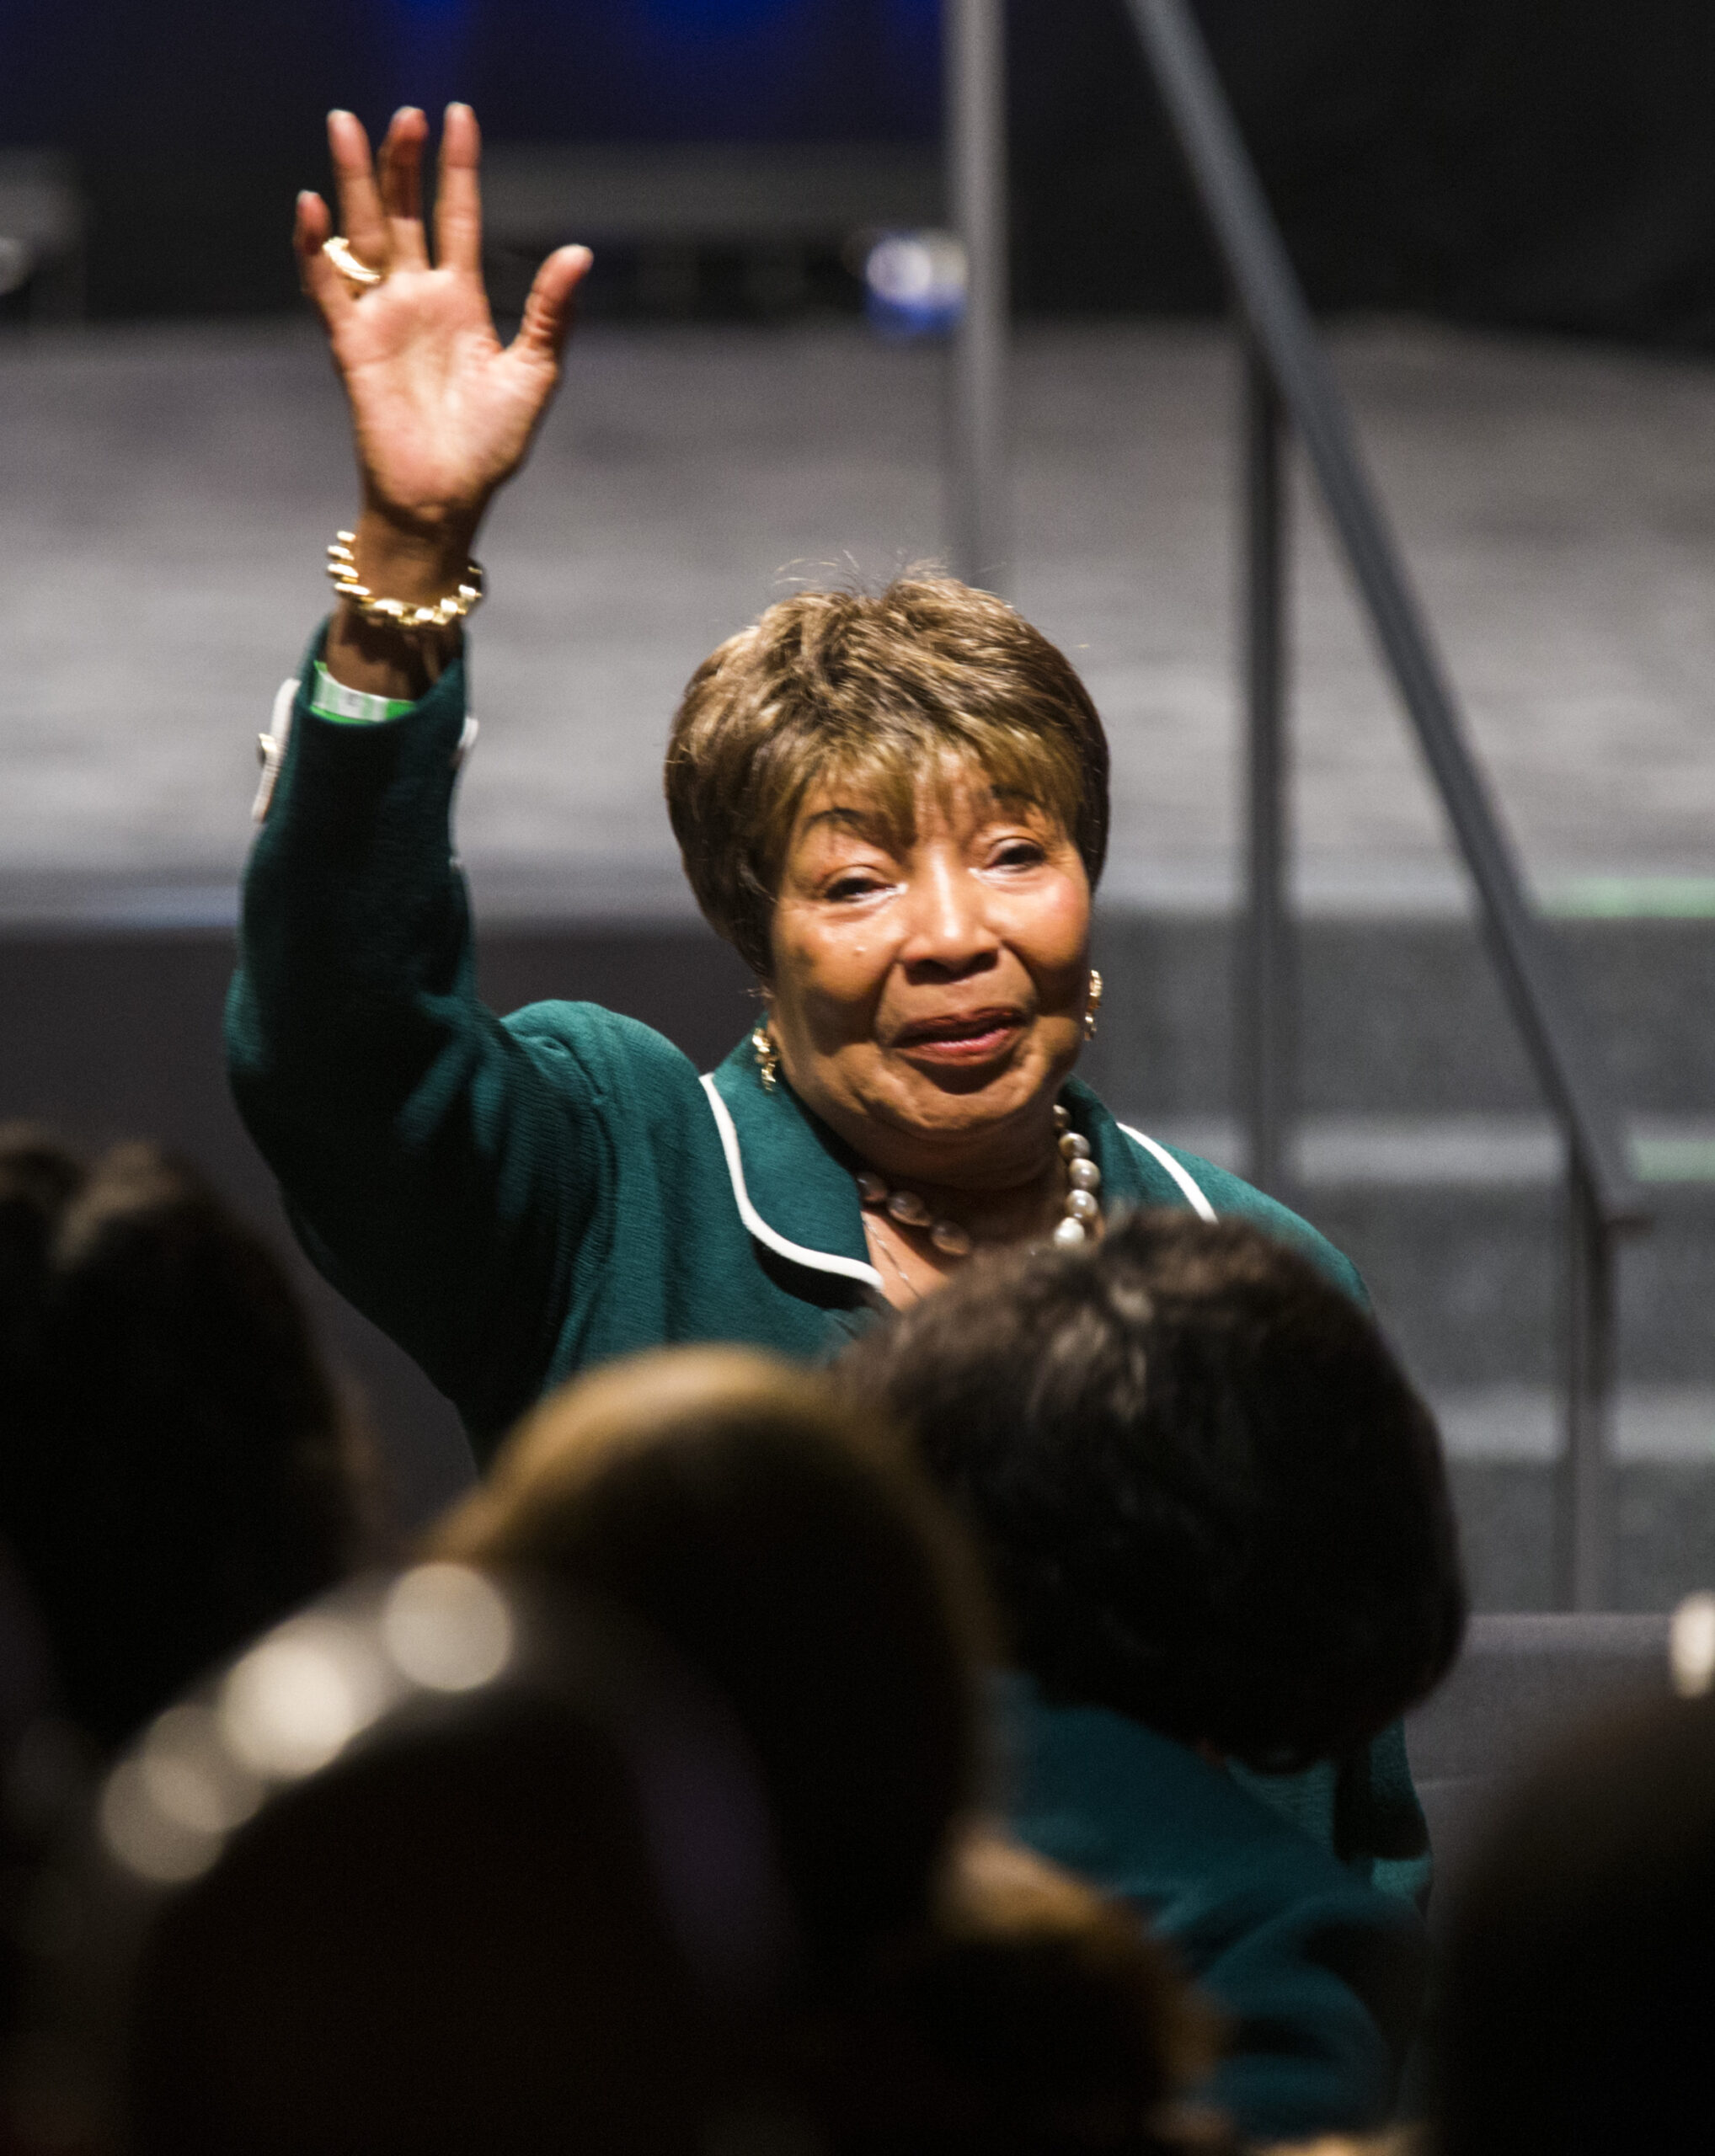 Former U.S. Rep. Eddie Bernice Johnson waves to the crowd before President Obama speaks at a Democratic National Committee (DNC) fundraiser at Gilley's Club in Dallas, Texas, Saturday, March 12, 2016. Johnson died on New Year's Eve. She was 88. Photo credit: Ashley Landis, The Dallas Morning News via The Associated Press, Pool